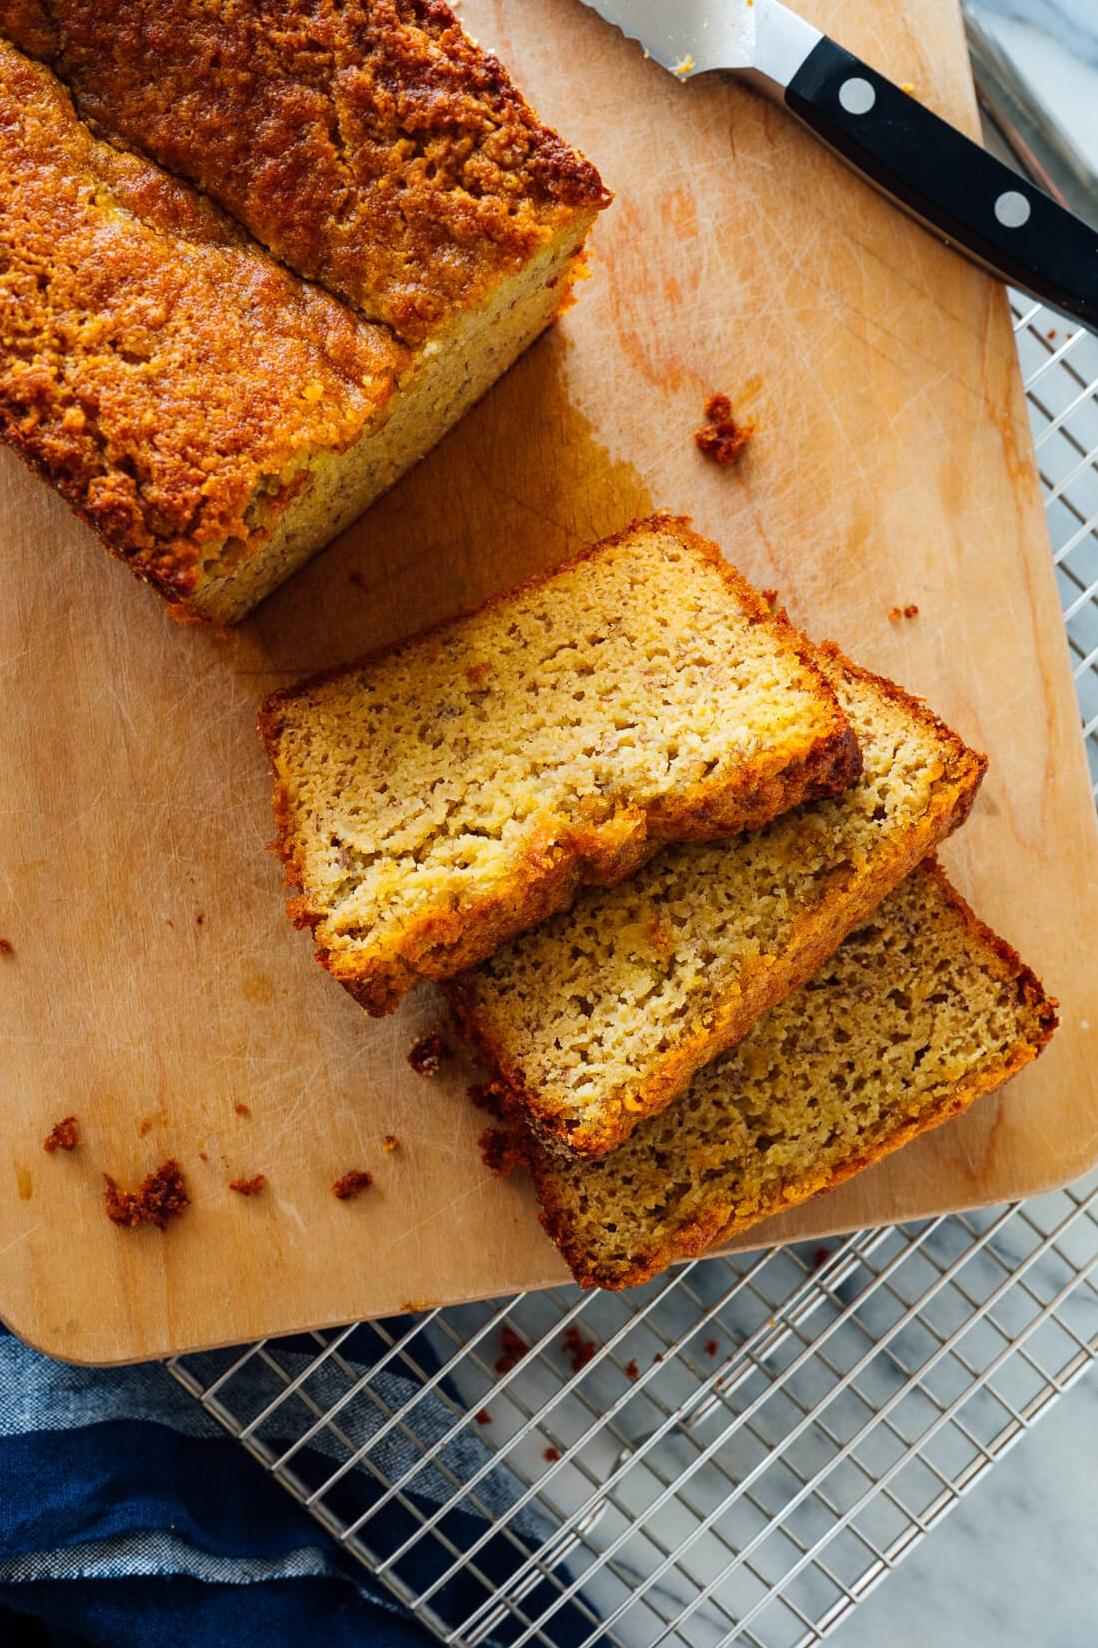  Whip up a batch of this banana bread for an easy and tasty breakfast on-the-go.